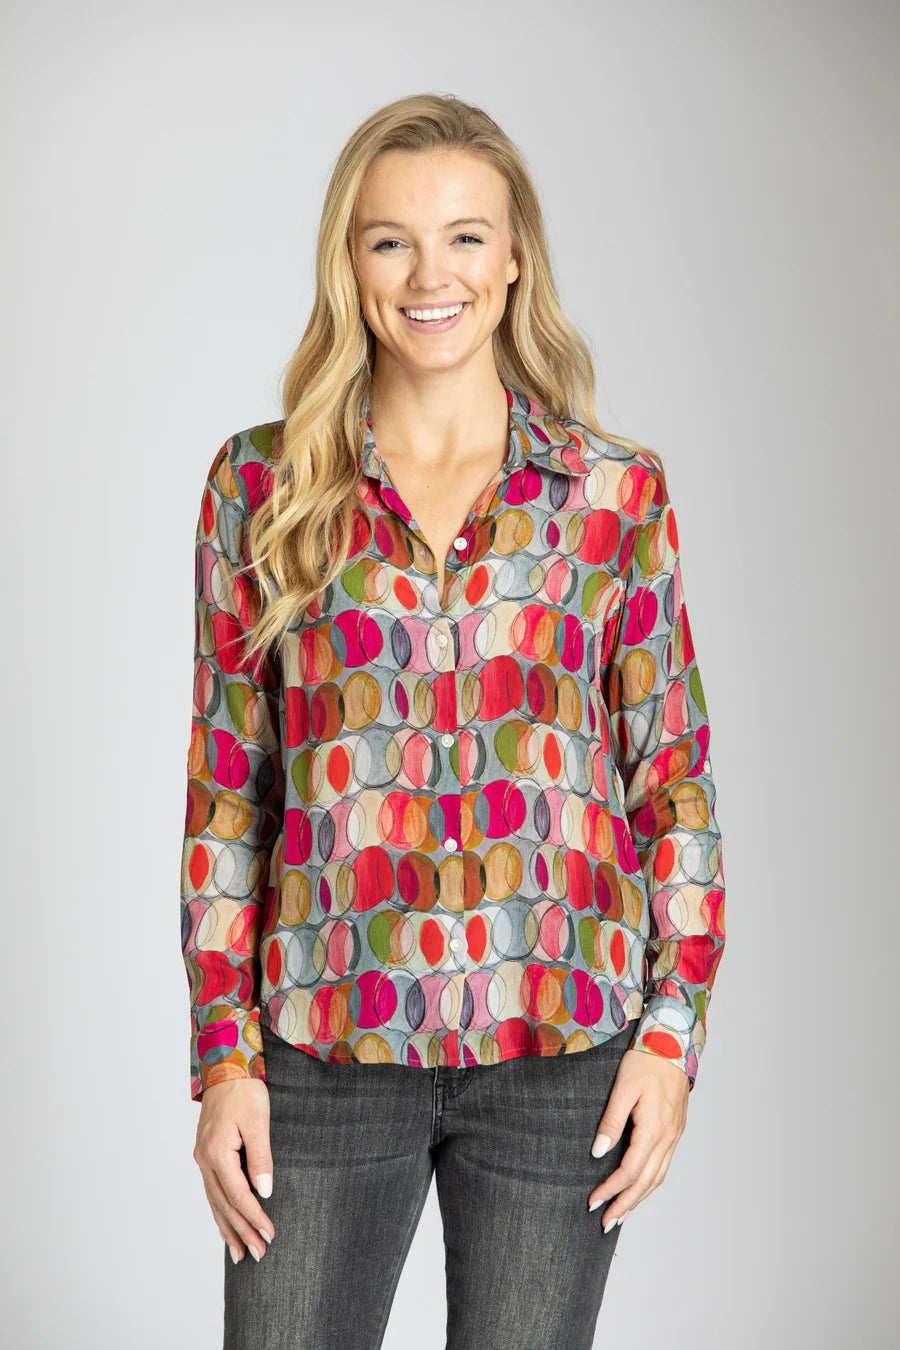 APNY Overlapping Red Circles Print Button Front Blouse at ooh la la! in Grapevine TX 76051